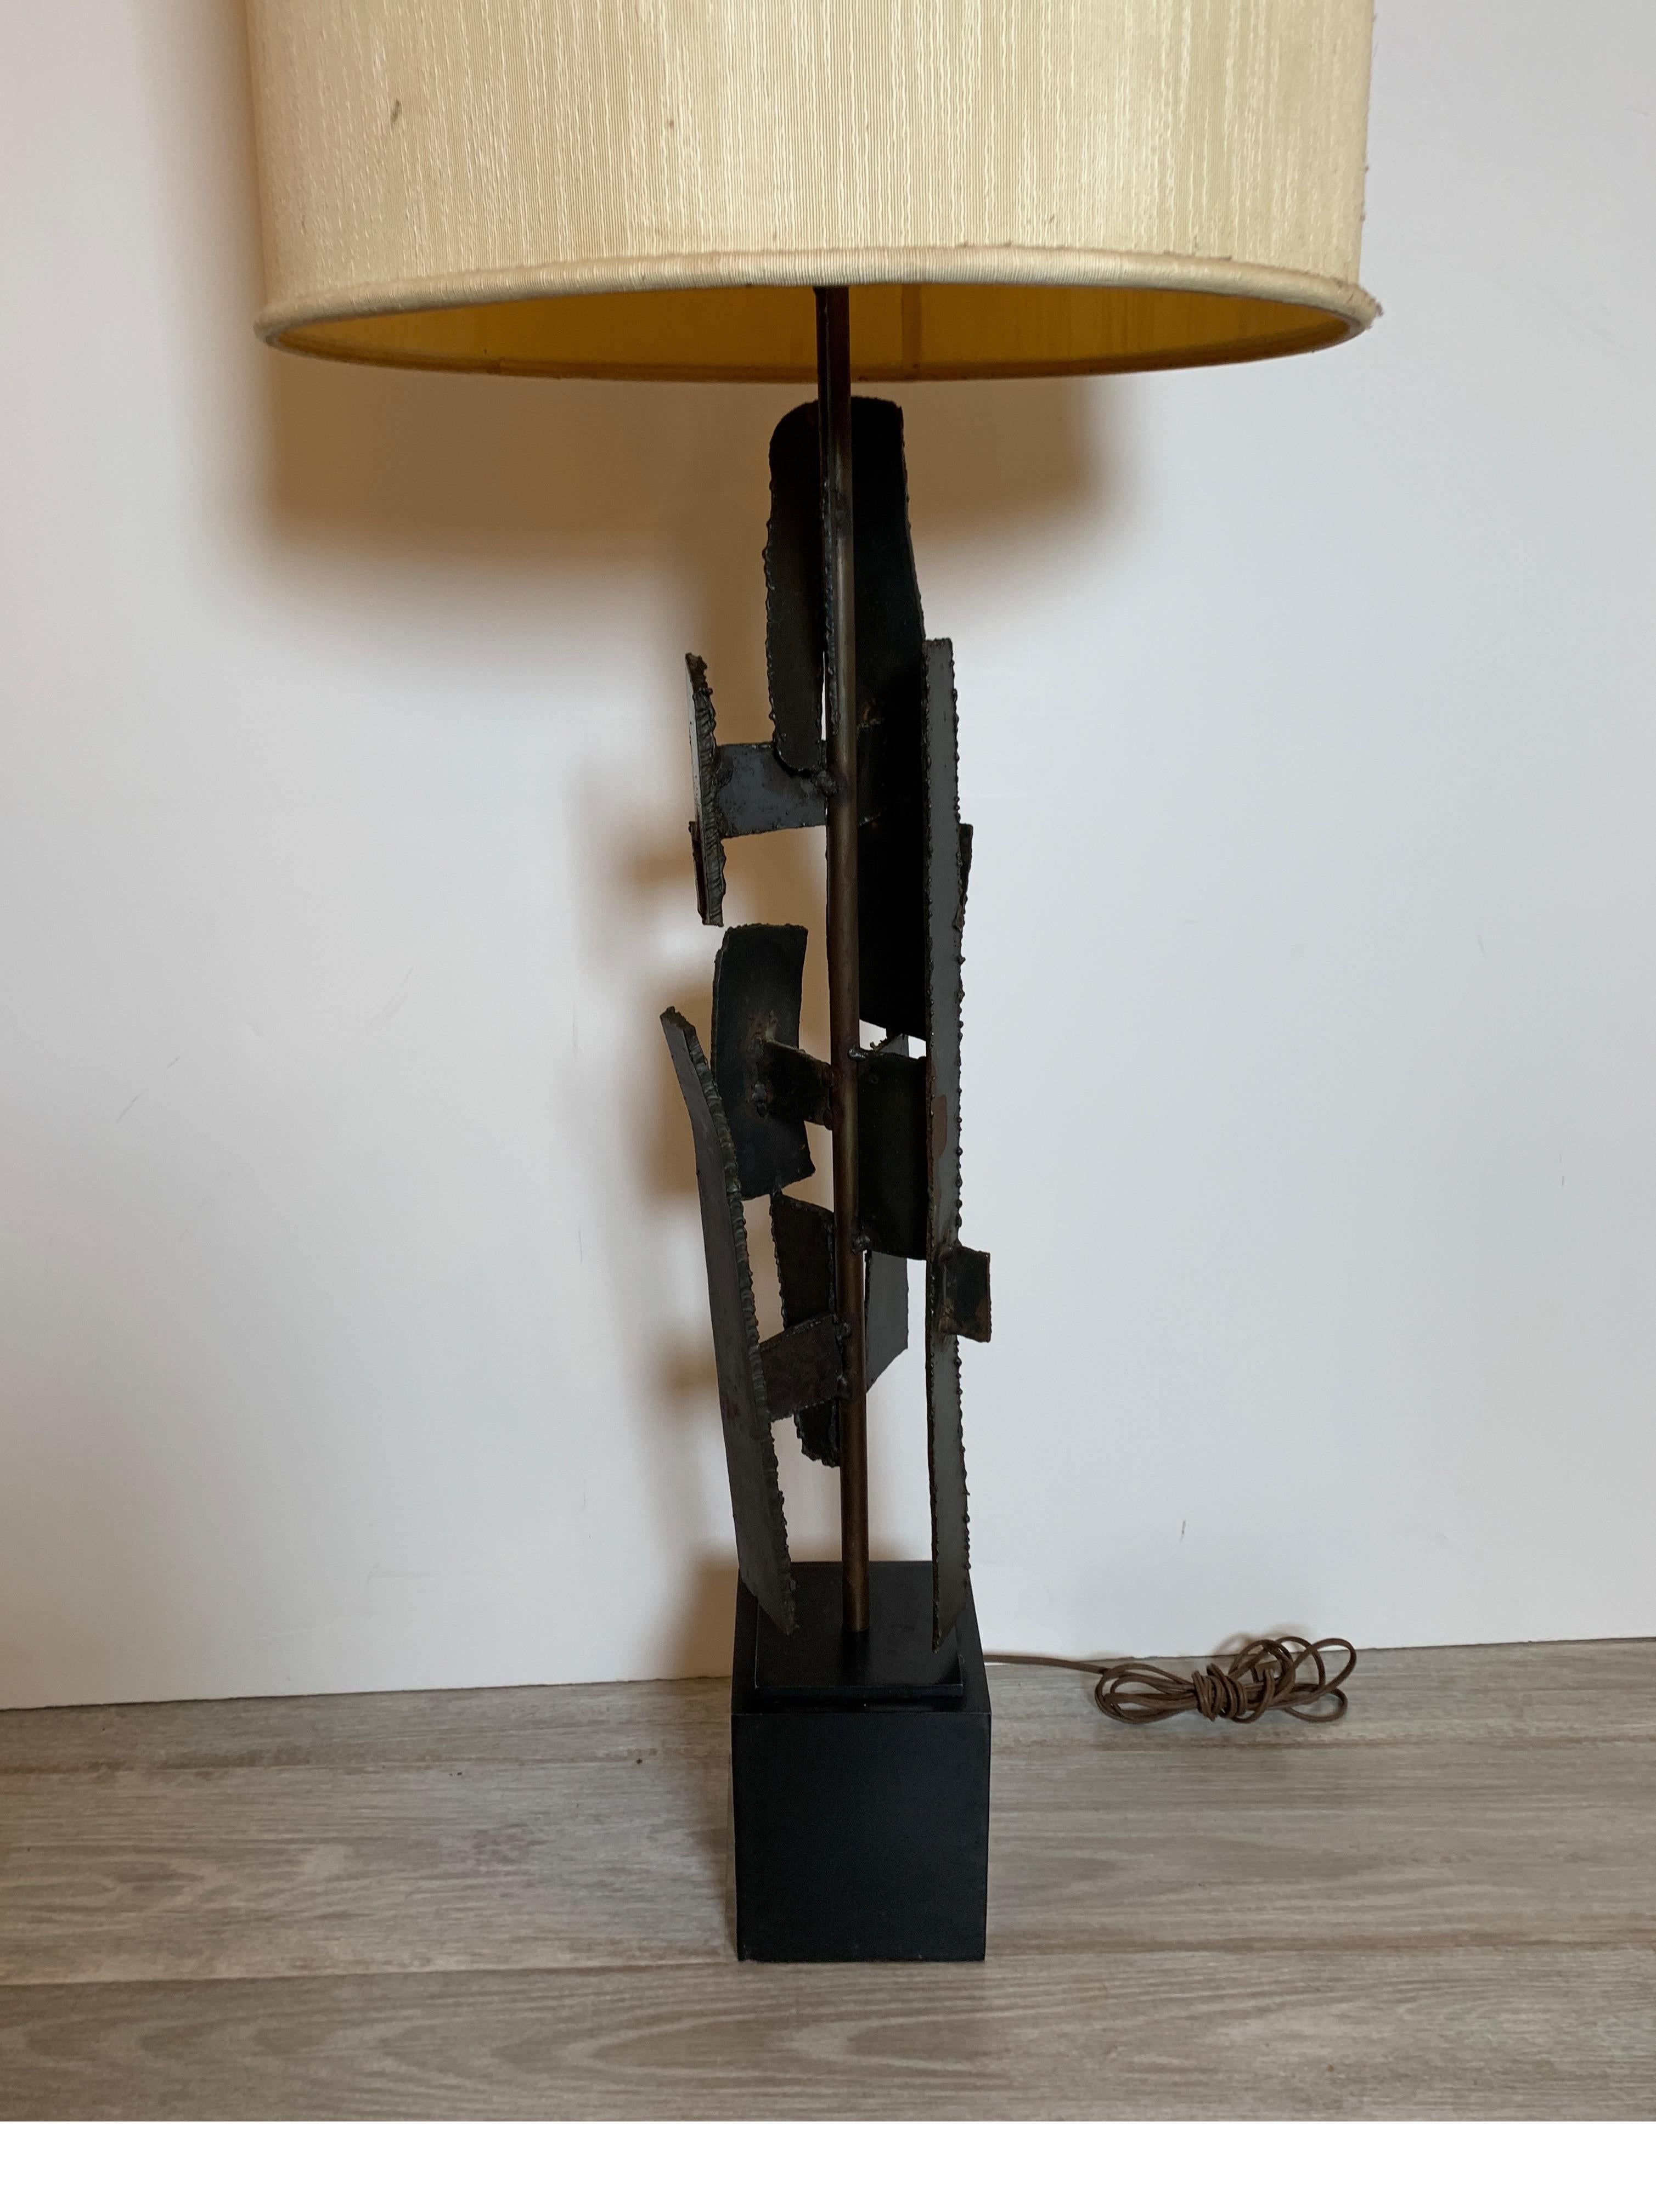 Midcentury Brutalist metal sculptural lamp designed by Harry Balmer for Laurel Lamp, circa 1960, 36 inches tall tot he top of the socket, 50 inches to the top of an appropriate drum shade, the shade is not included with the lamp and for photographic